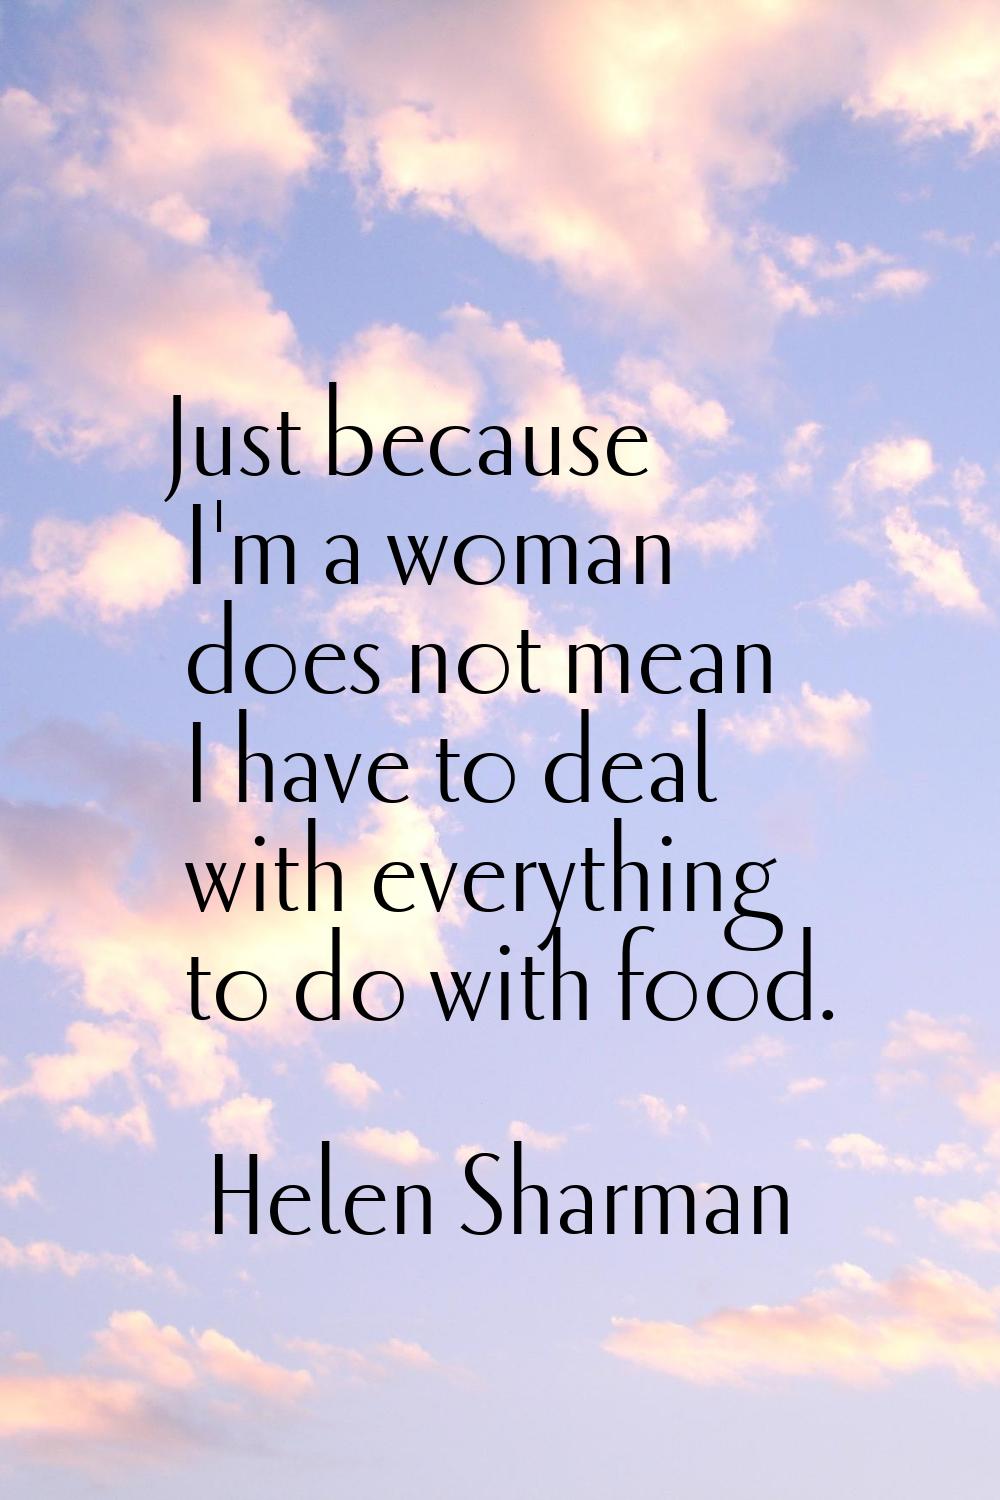 Just because I'm a woman does not mean I have to deal with everything to do with food.